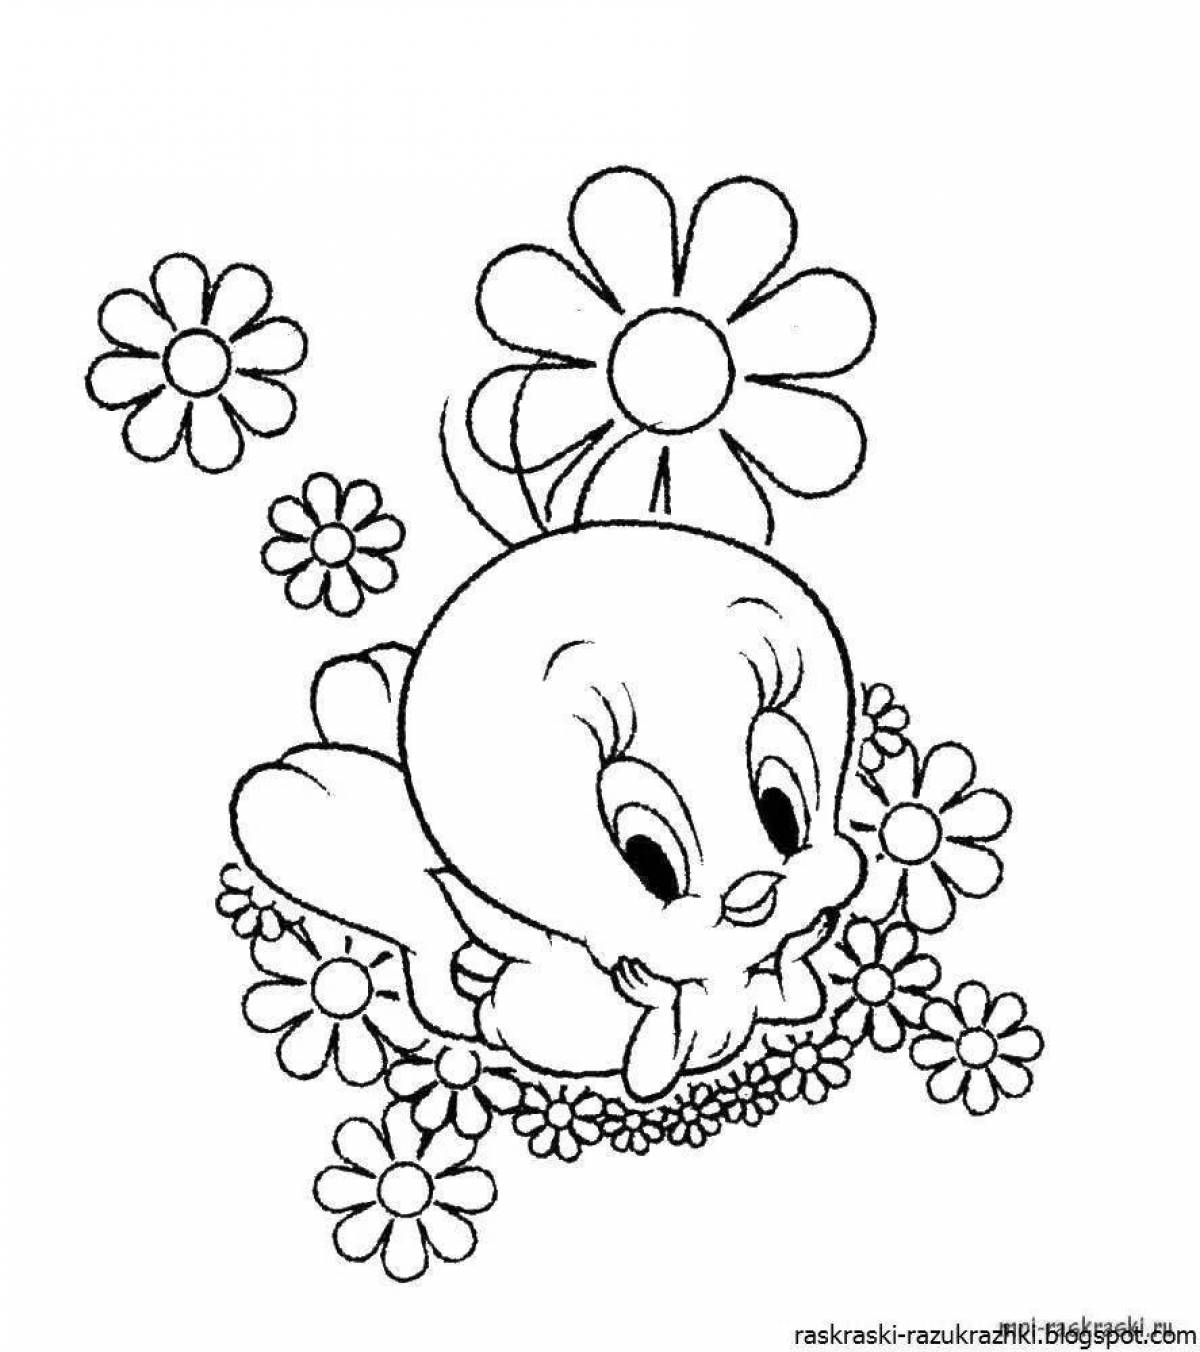 Colorful drawing of a coloring page